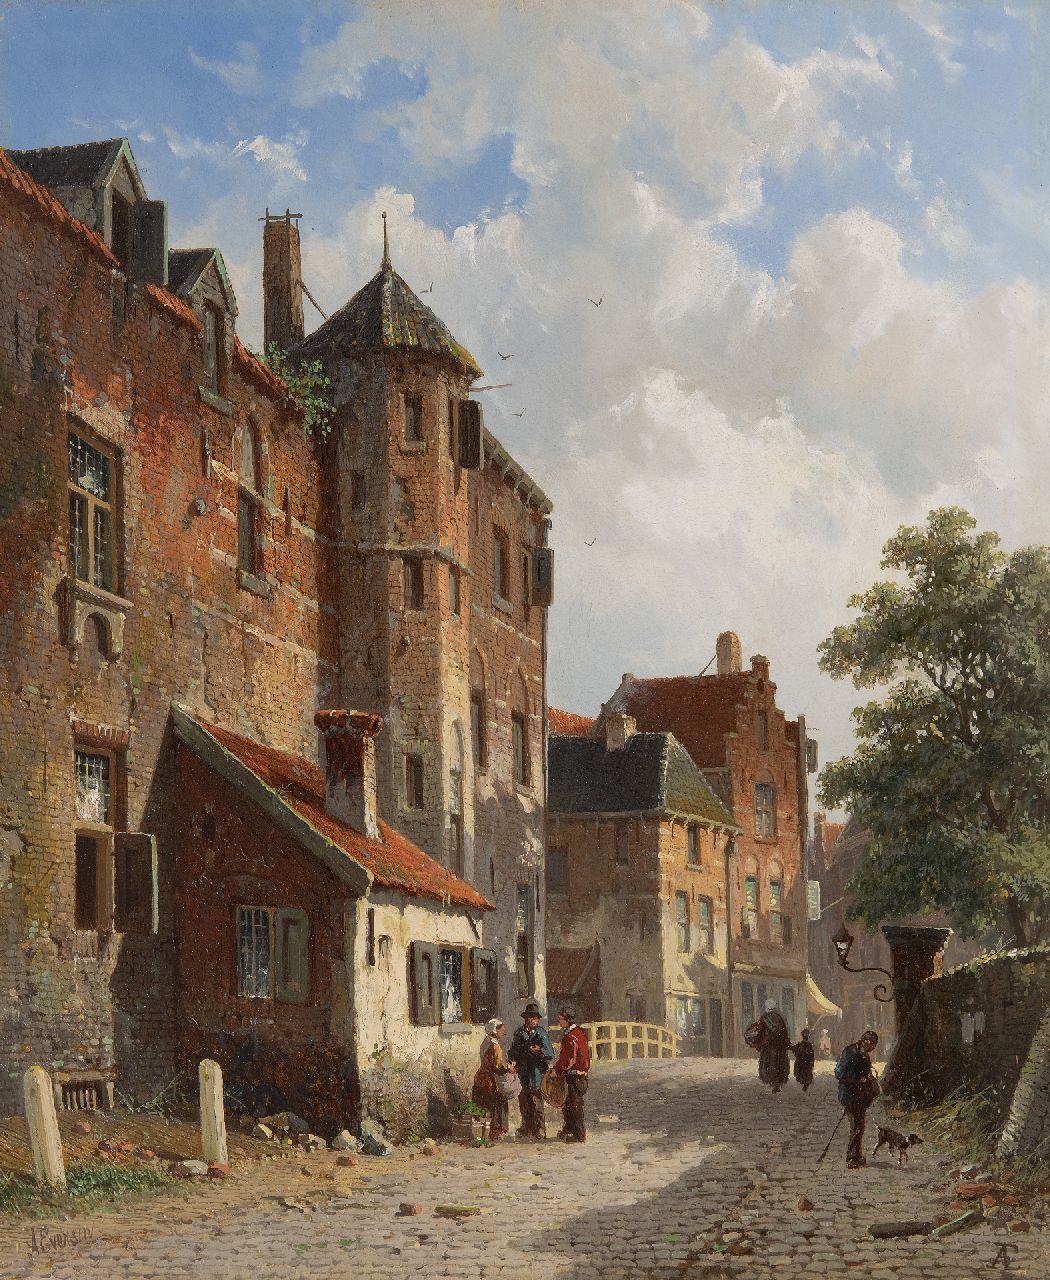 Eversen A.  | Adrianus Eversen | Paintings offered for sale | Sunny Dutch street, oil on panel 41.8 x 34.4 cm, signed l.l. in full and l.r. with monogram